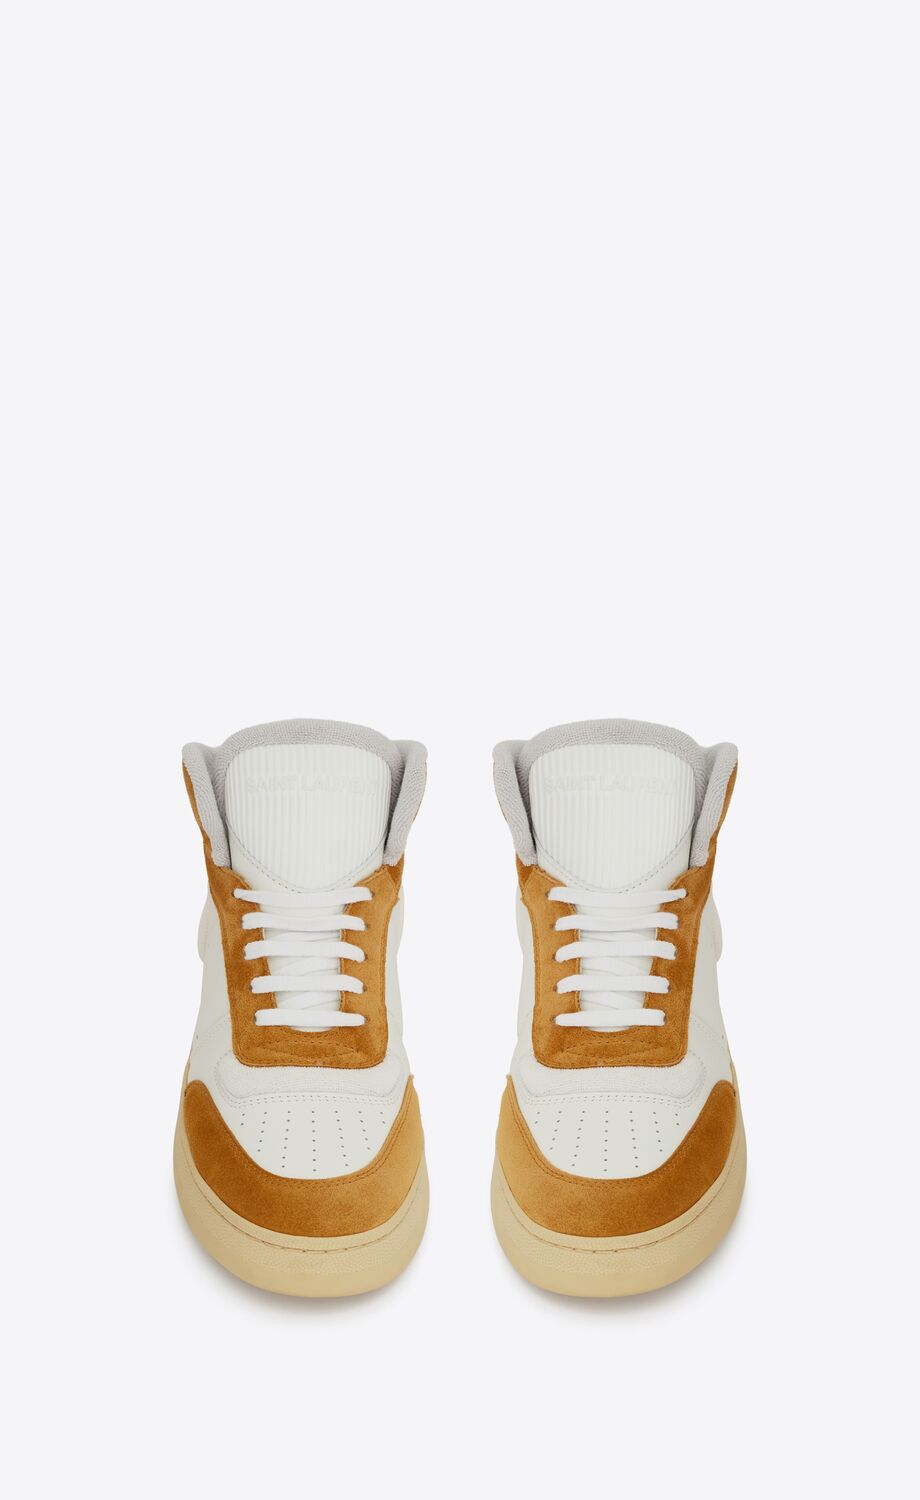 SL/80 sneakers in leather and suede | Saint Laurent | YSL.com